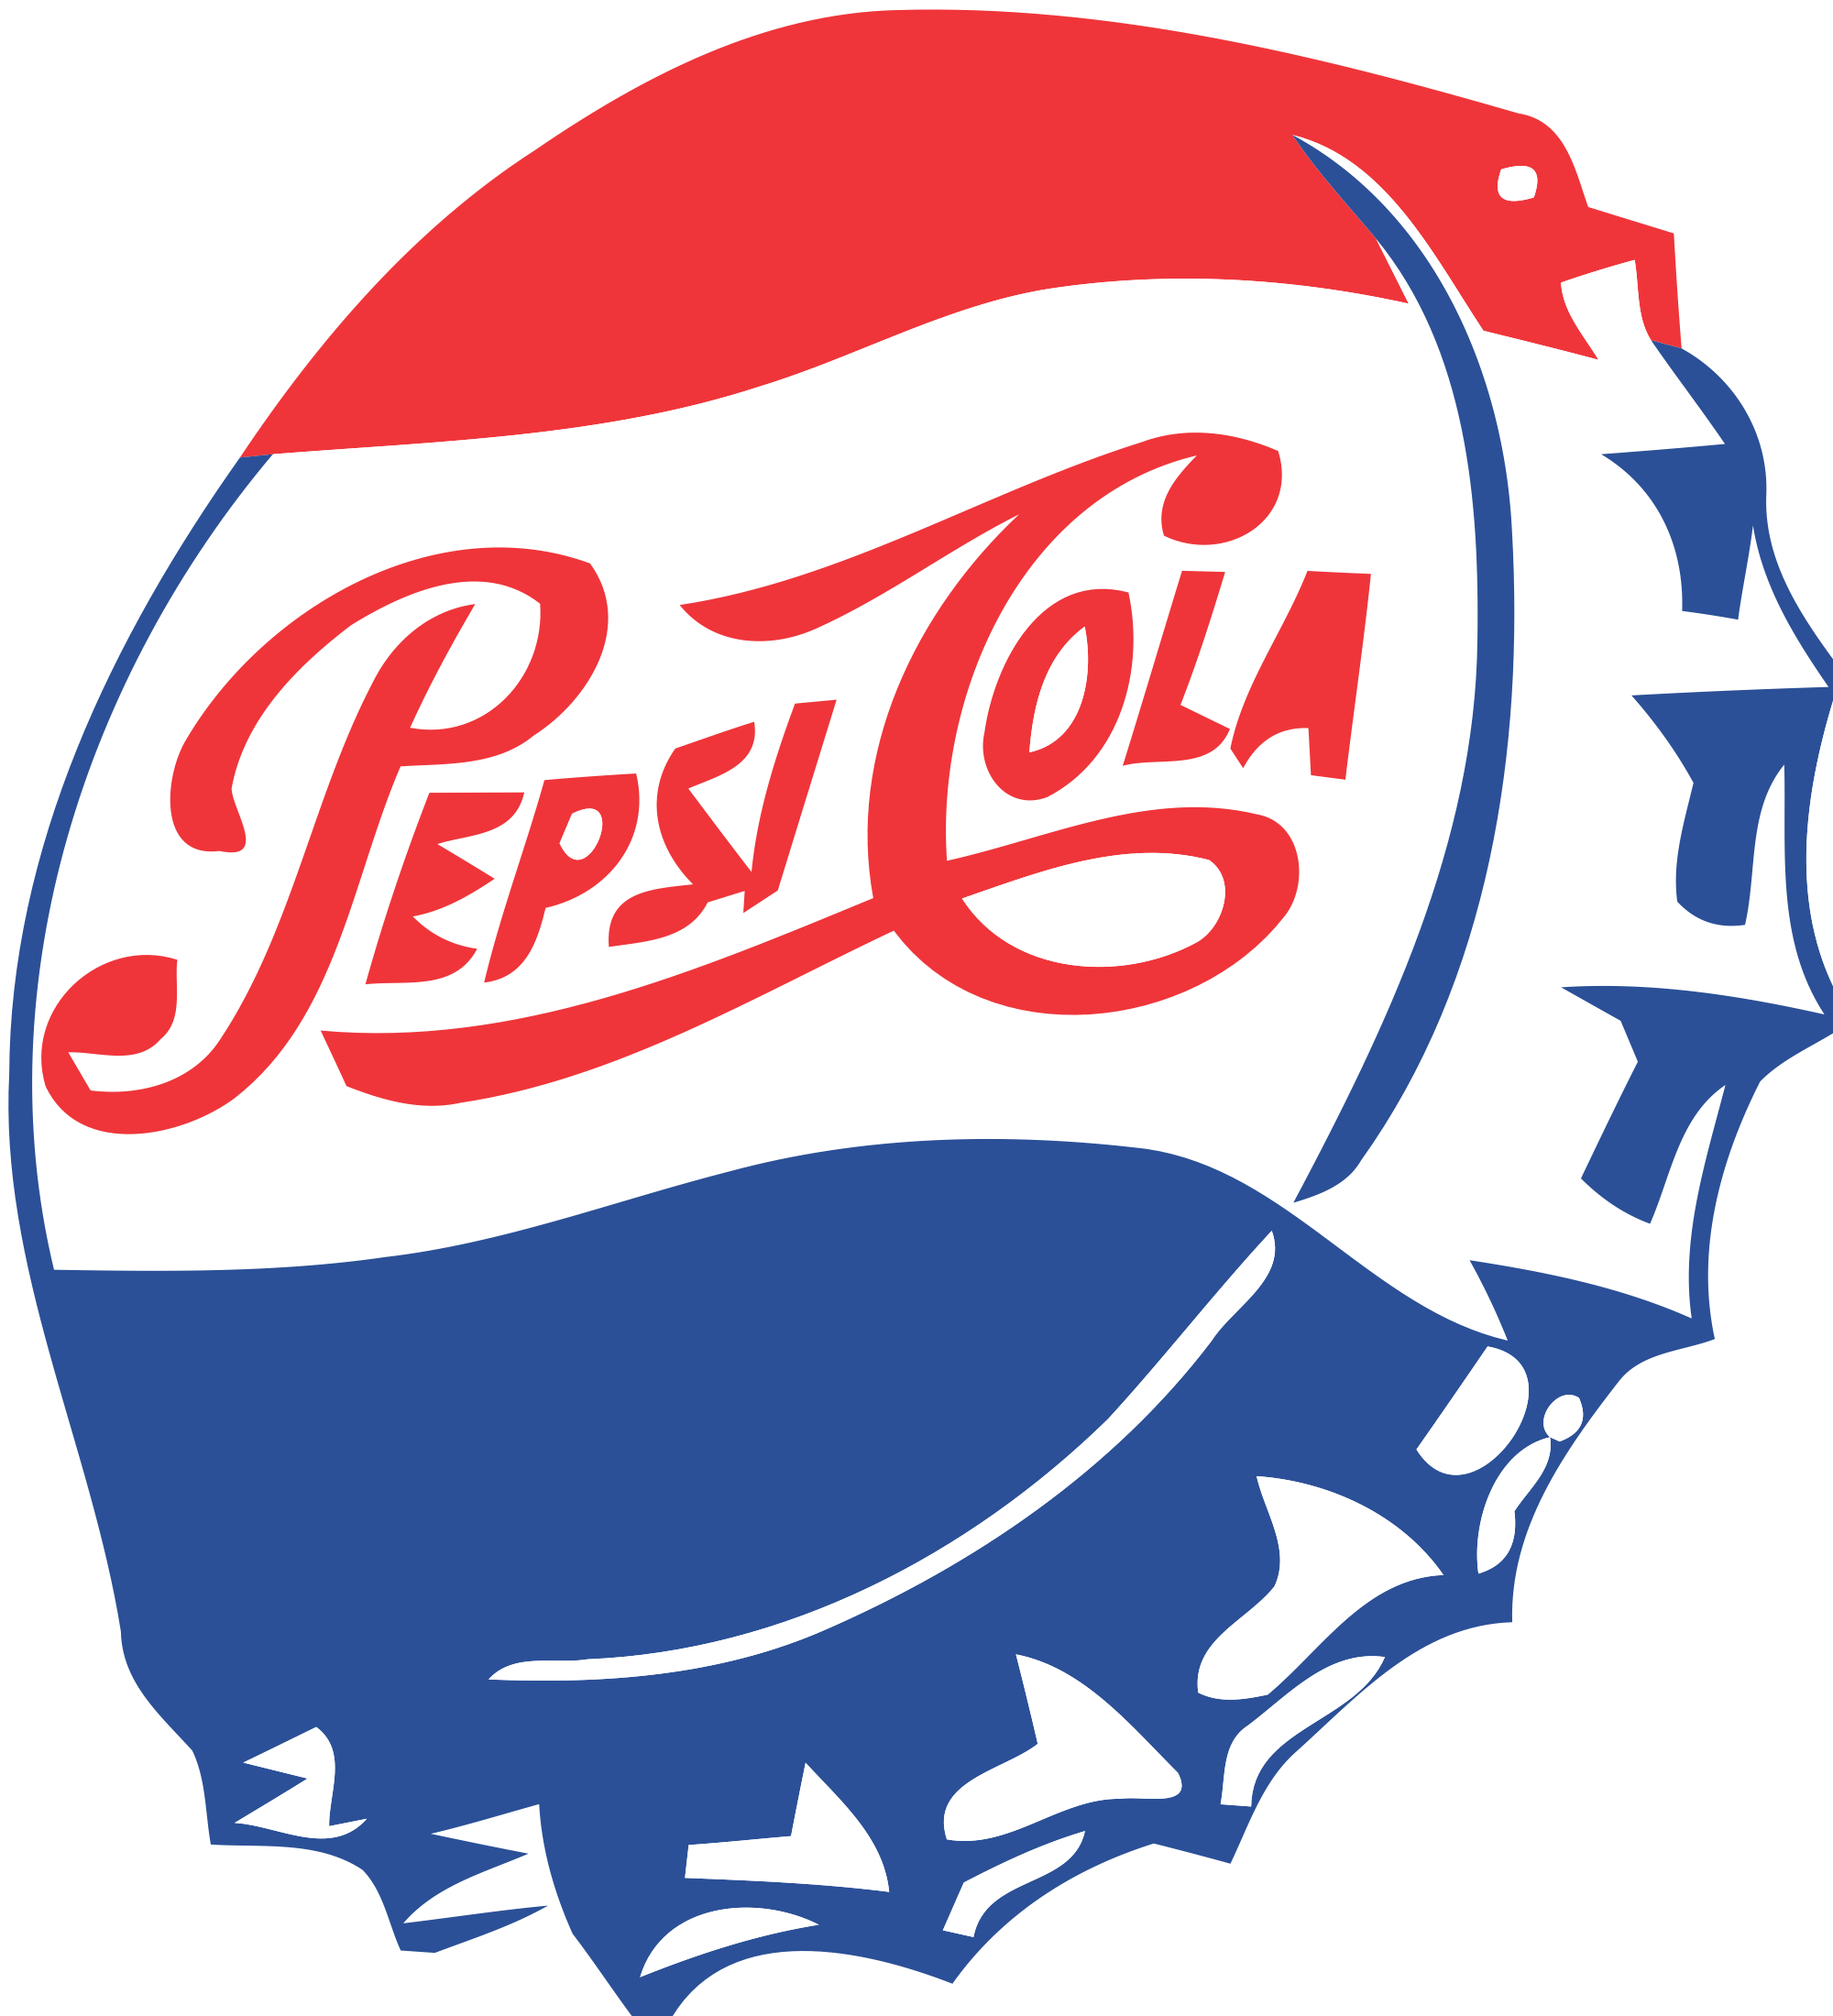 Pepsi Globe Logo - The Pepsi Globe is the name of the logo for Pepsi, called as such ...